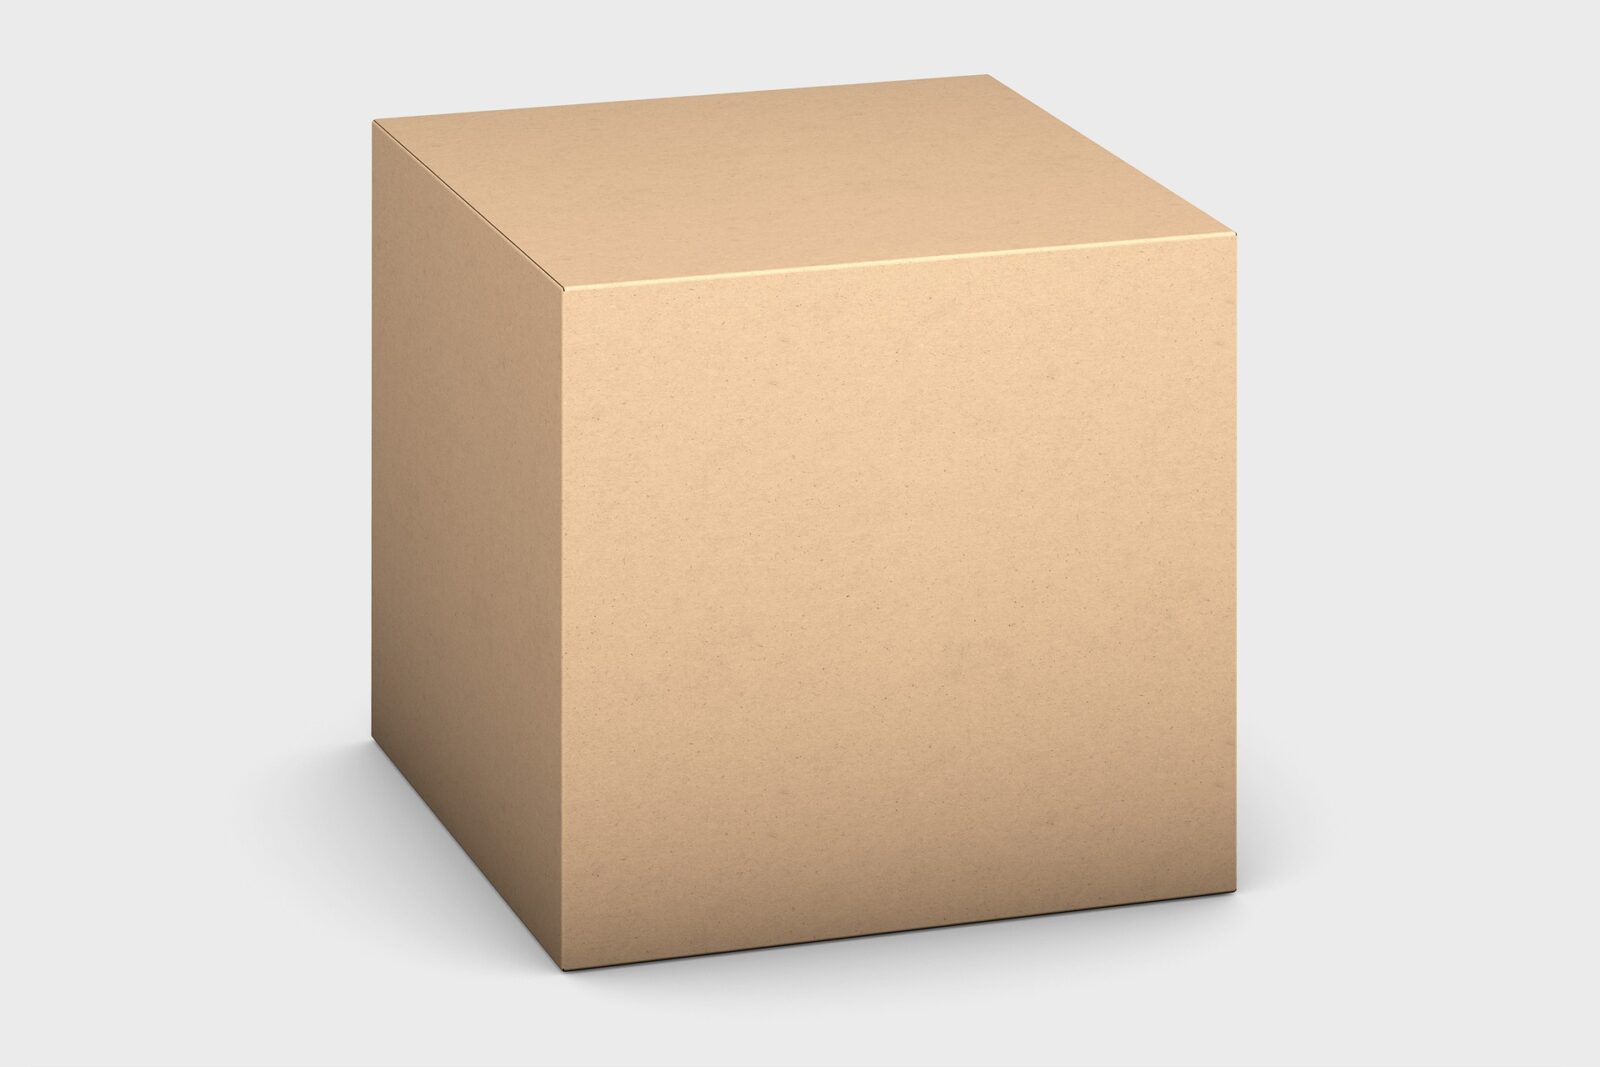 Designing The Custom Kraft Boxes The Easy Way